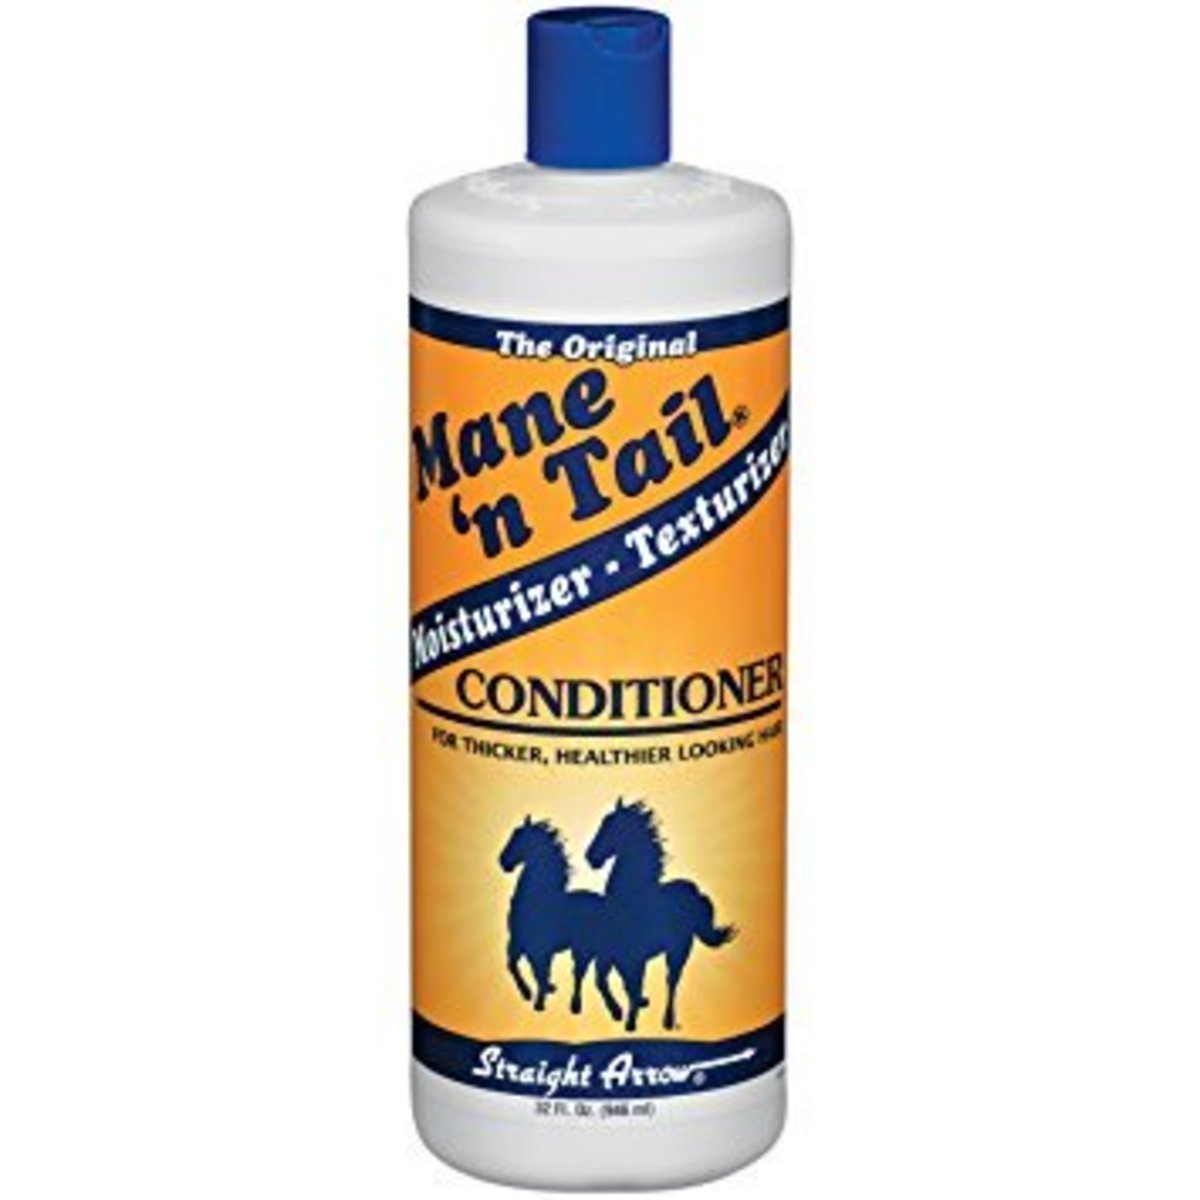 curly-hair-conditioners-for-under-15-a-bottle